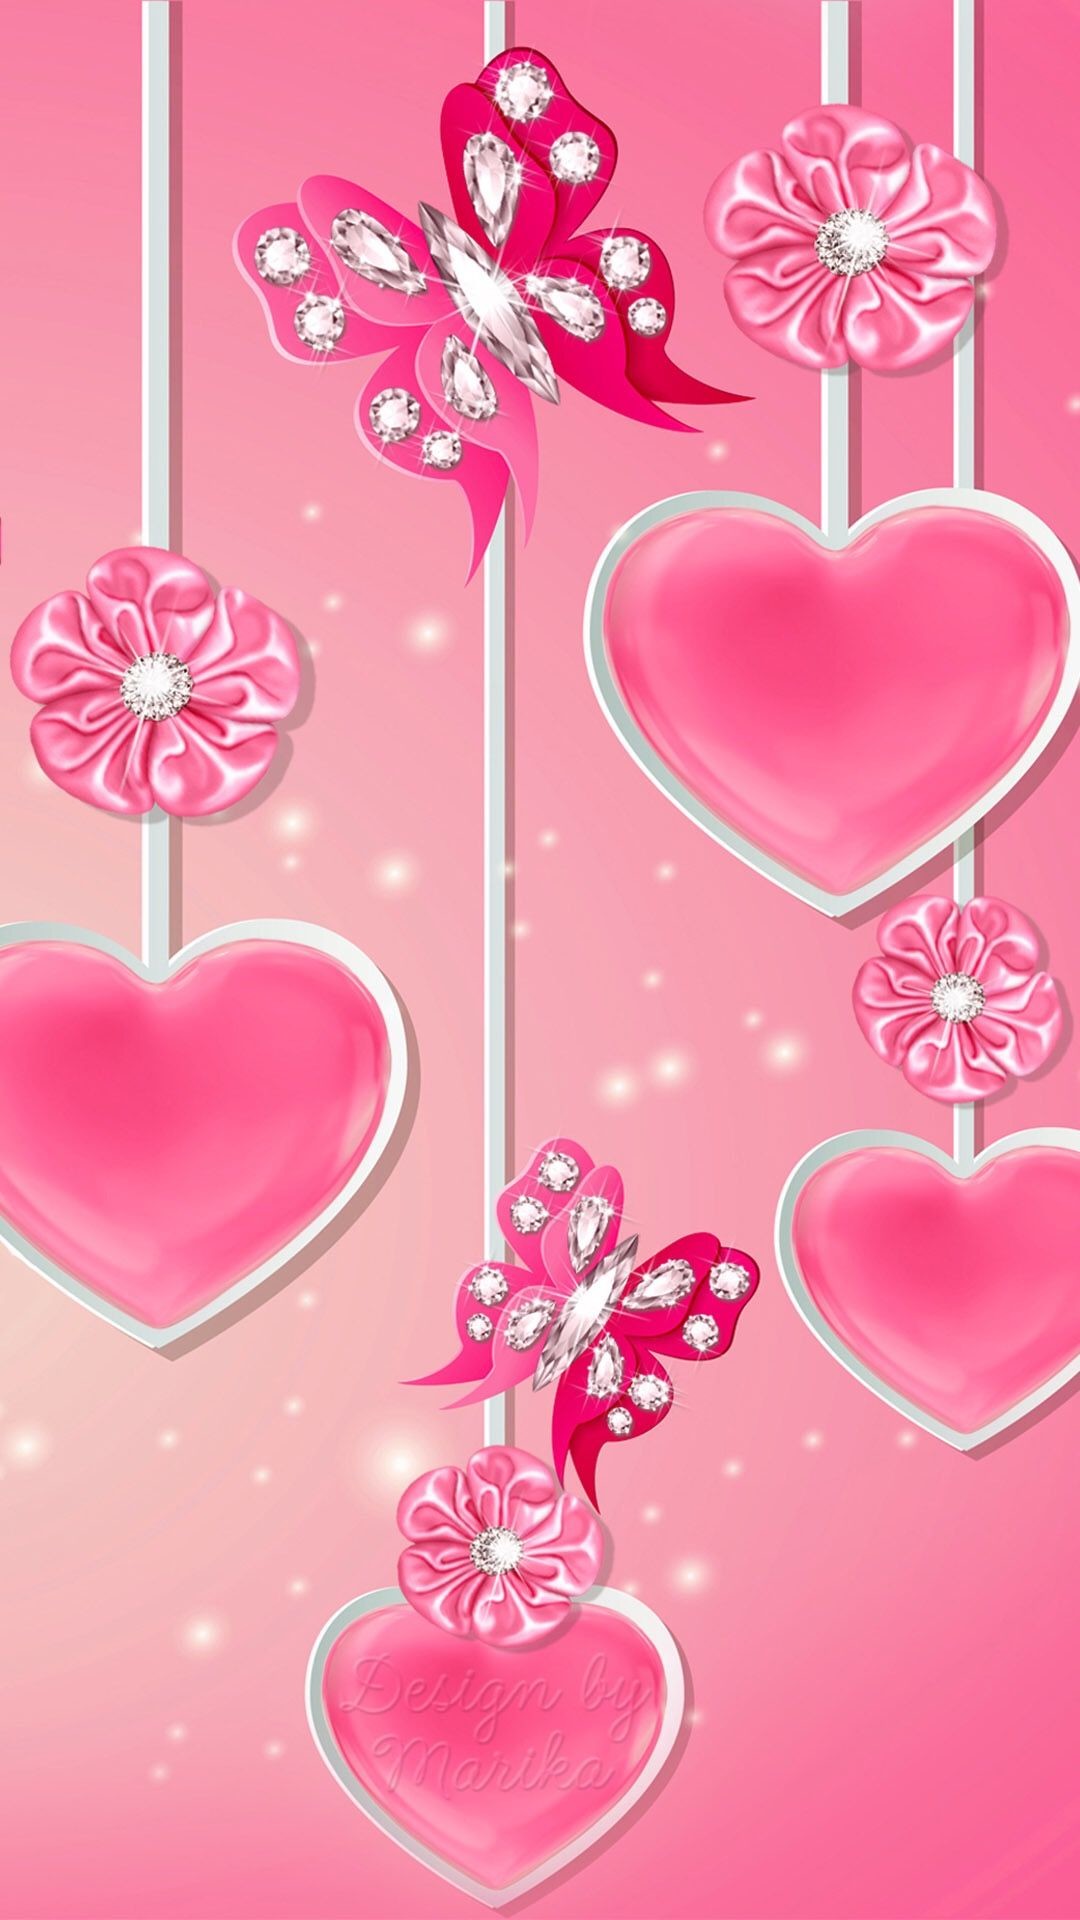 1080x1920, Pink Hearts Flowers And Butterflies Wallpaper - Love Pink Wallpaper Hd - HD Wallpaper 